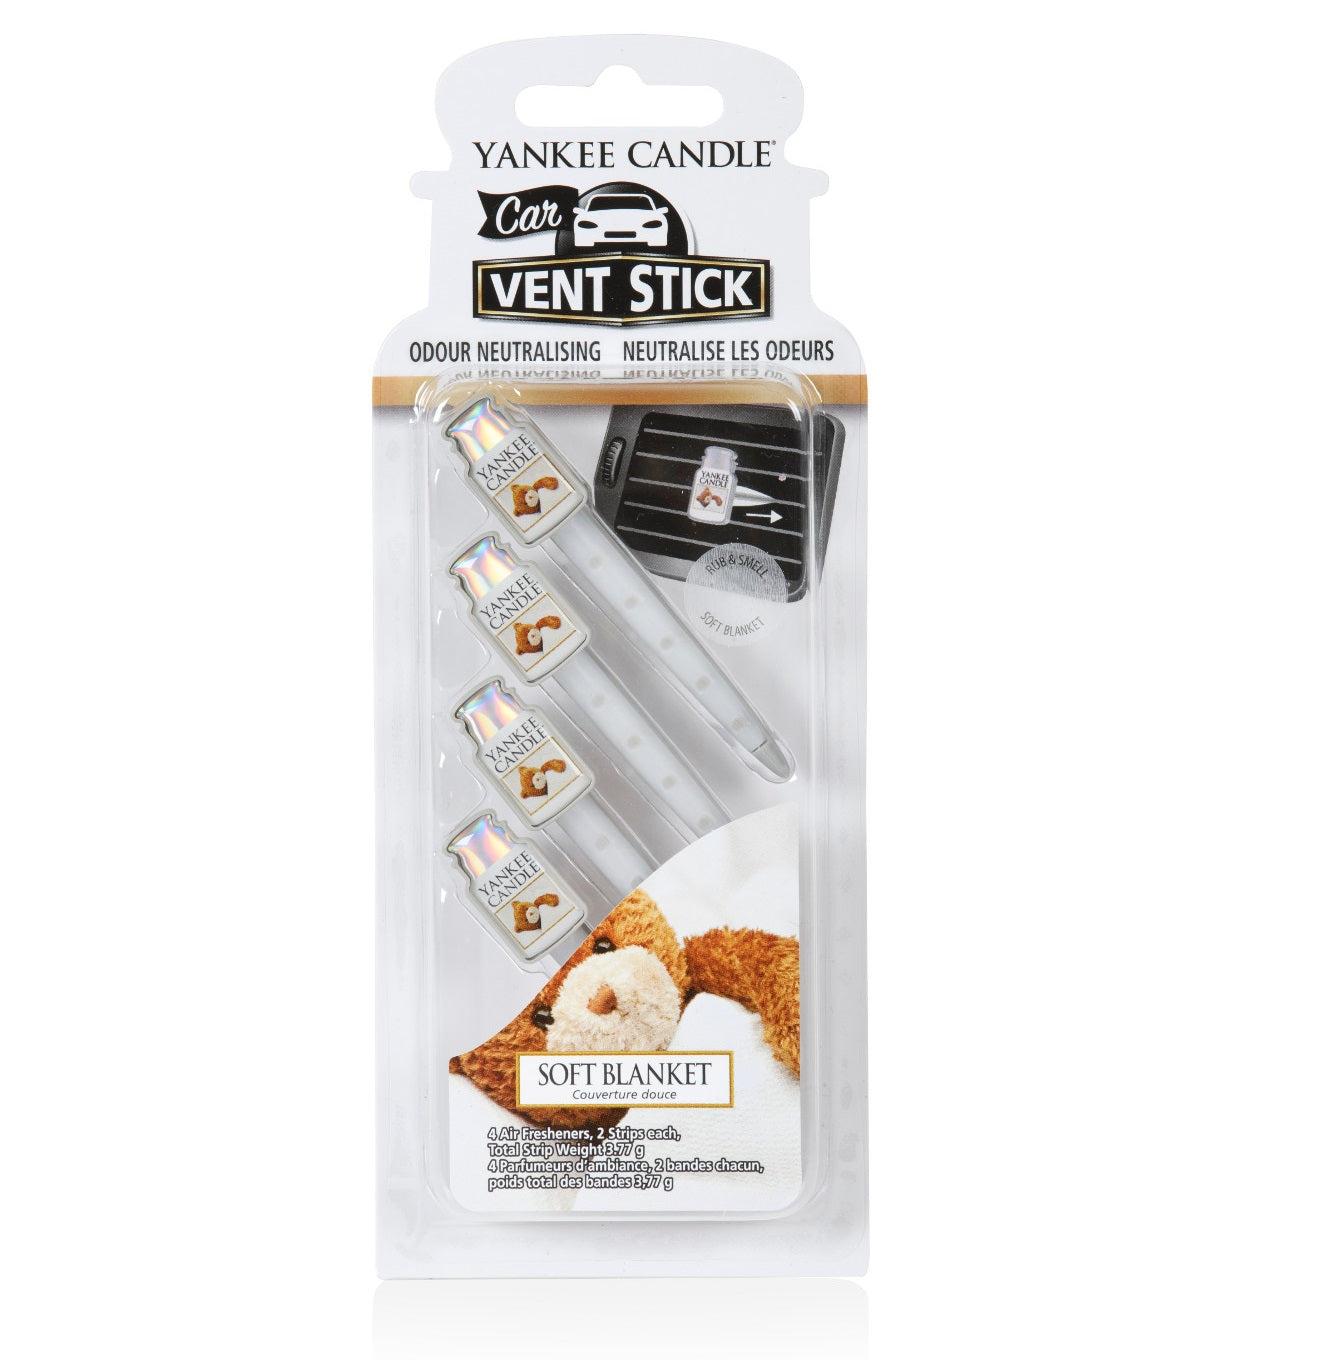 SOFT BLANKET -Yankee Candle- Vent Stick